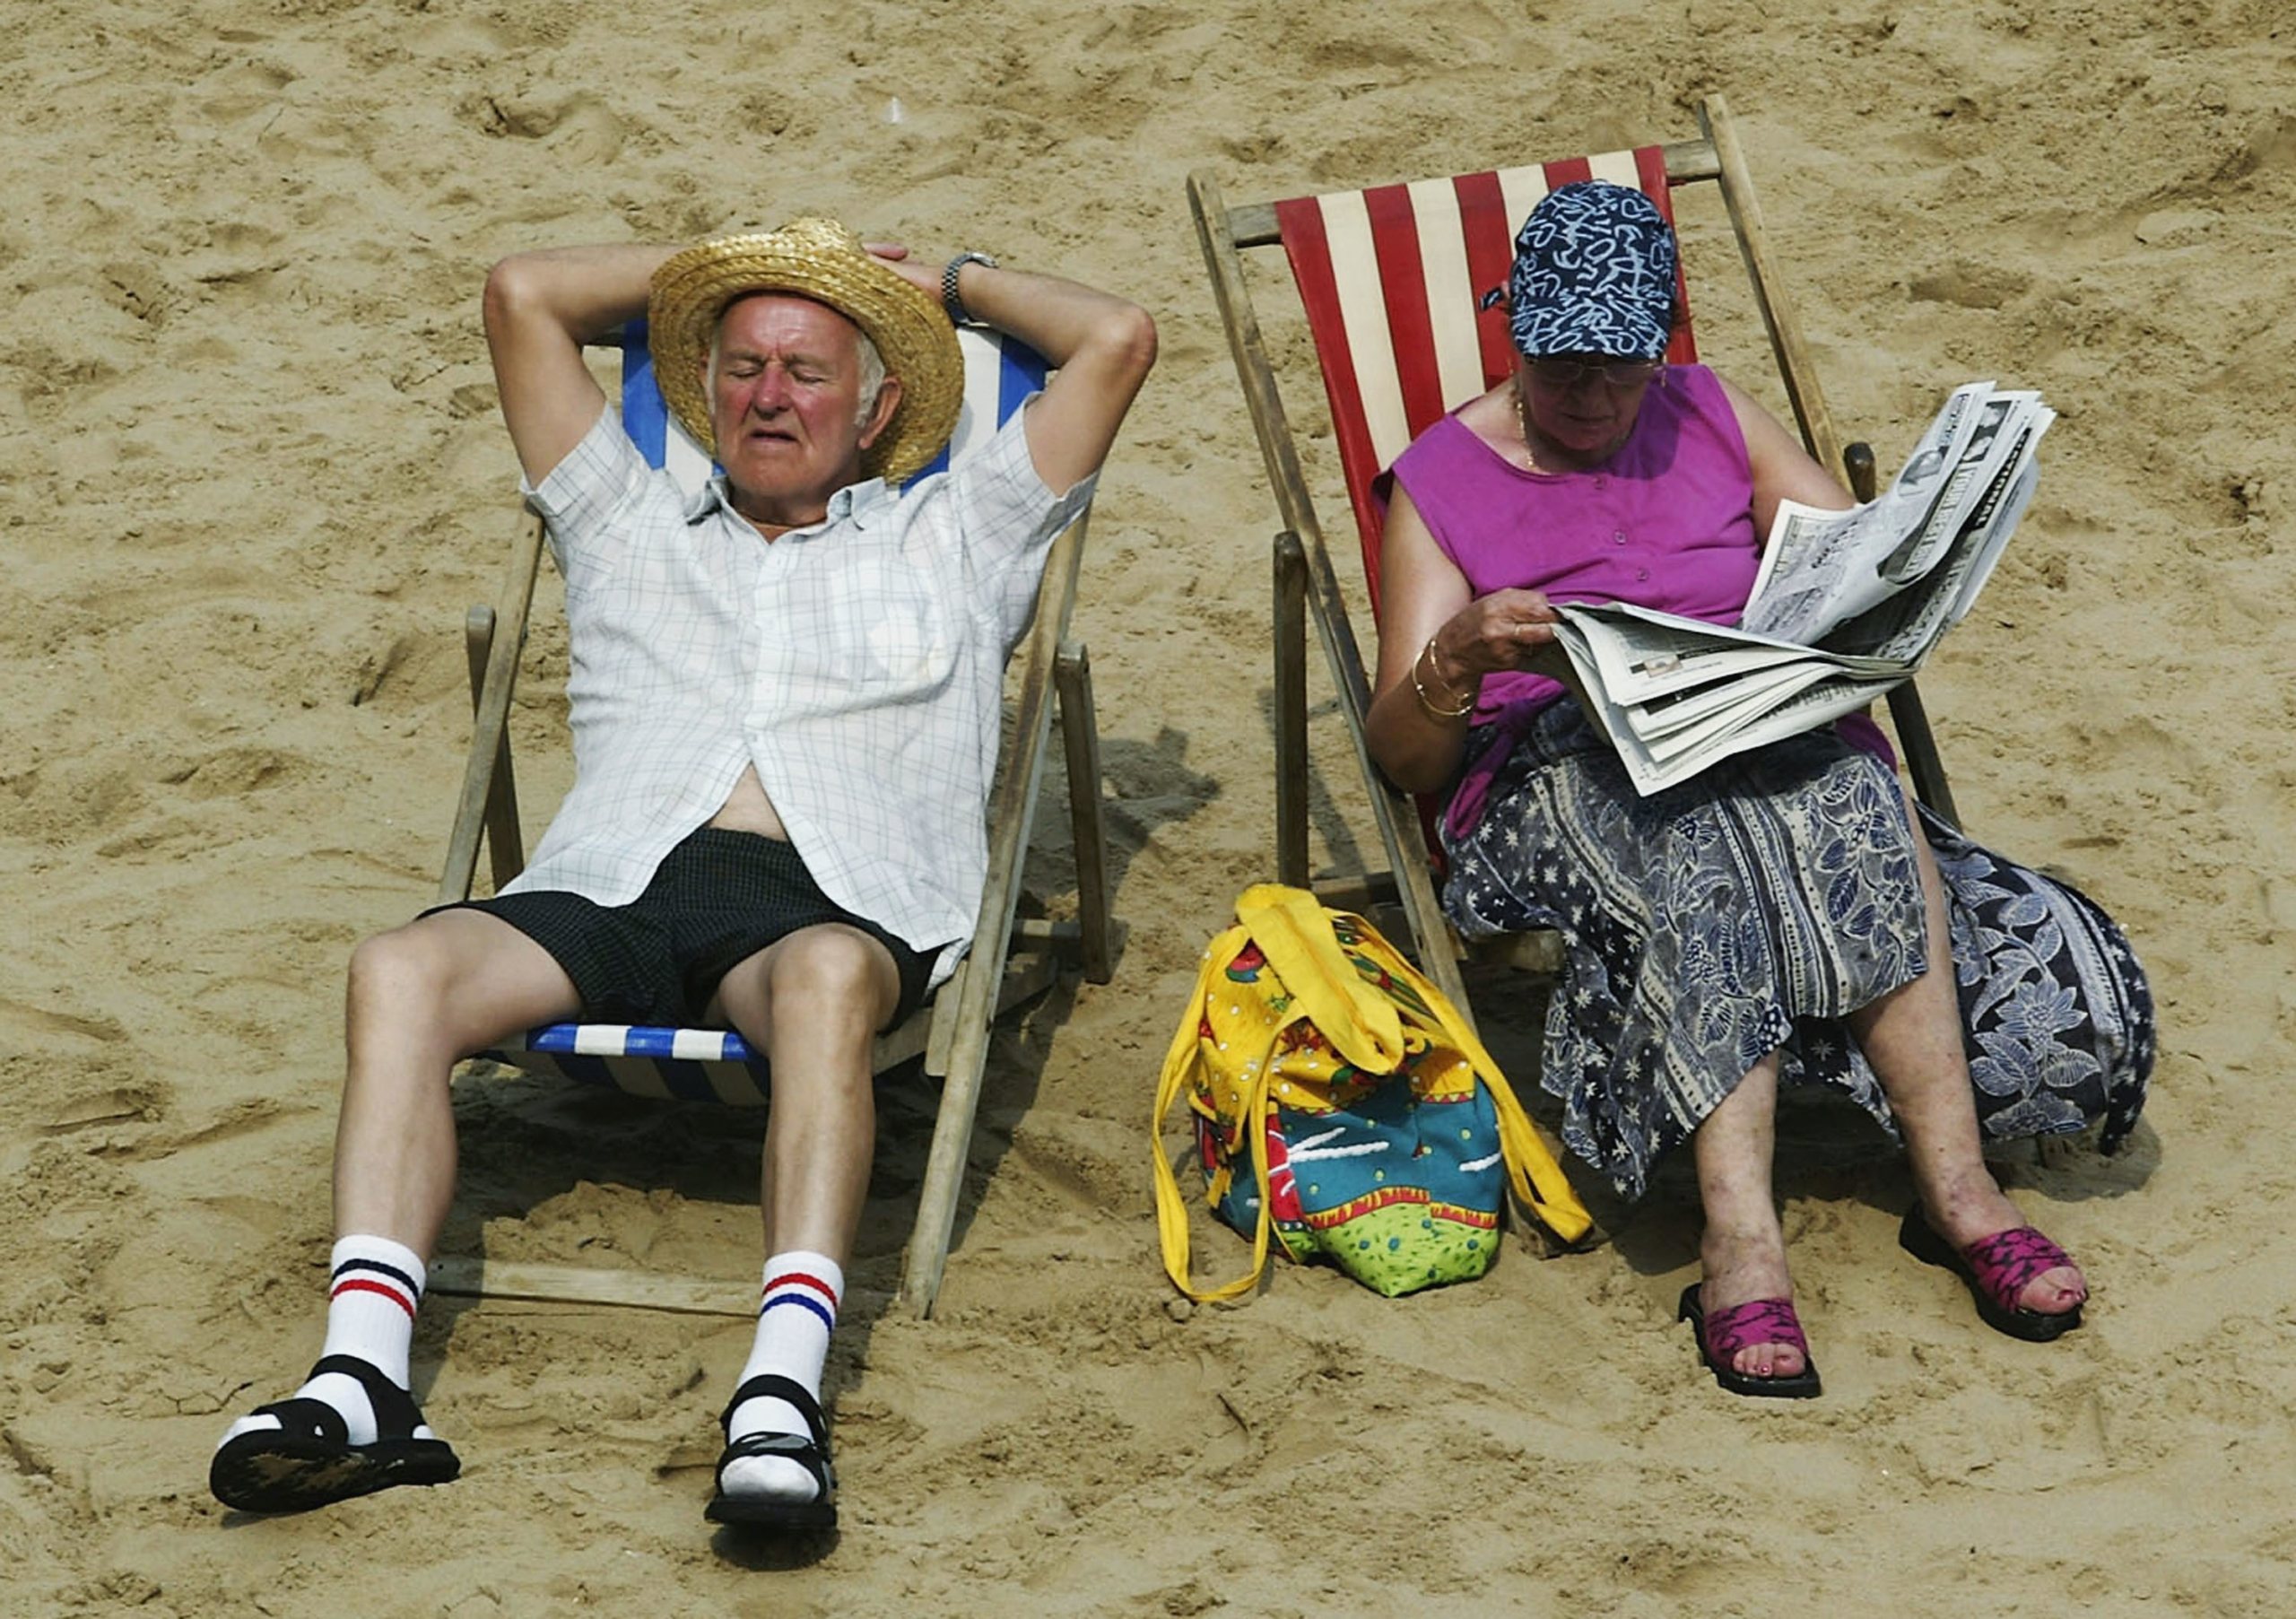 Brits Enjoy The Unusually Hot Weather